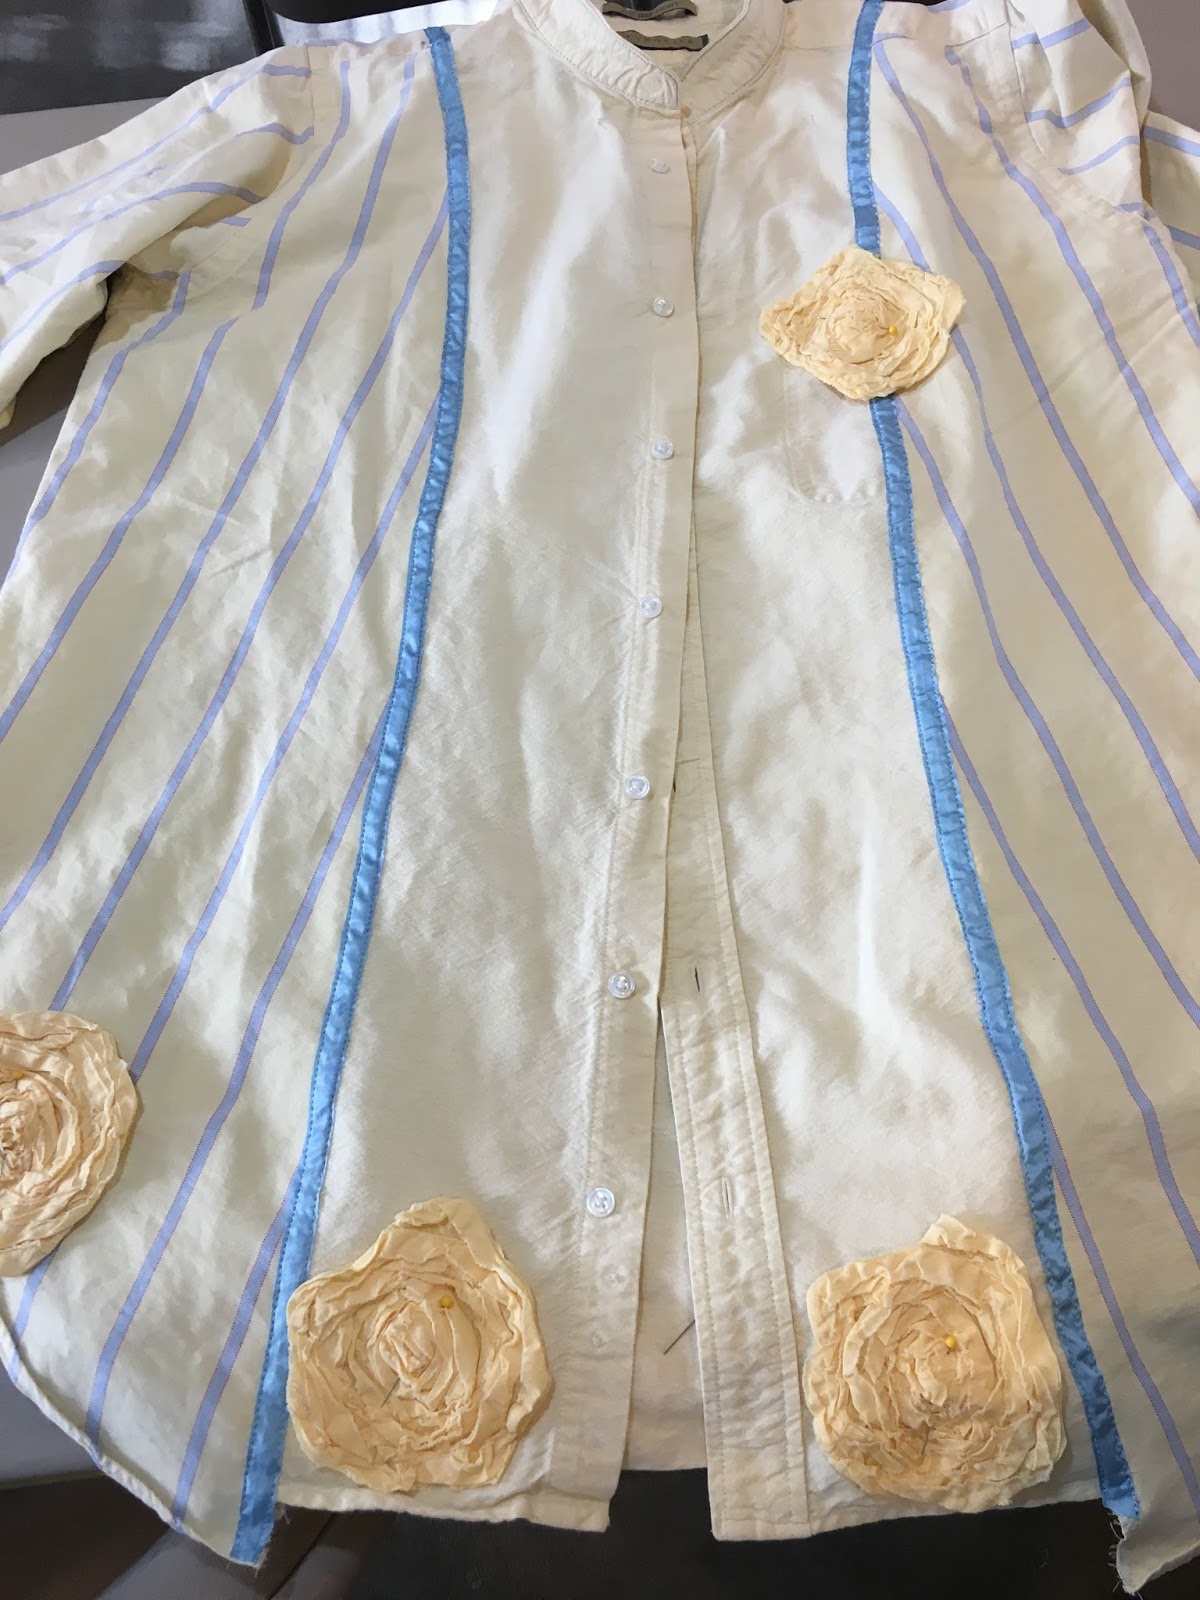 l.a.s.fibers: Upcycled and Repurposed Shirt Workshop